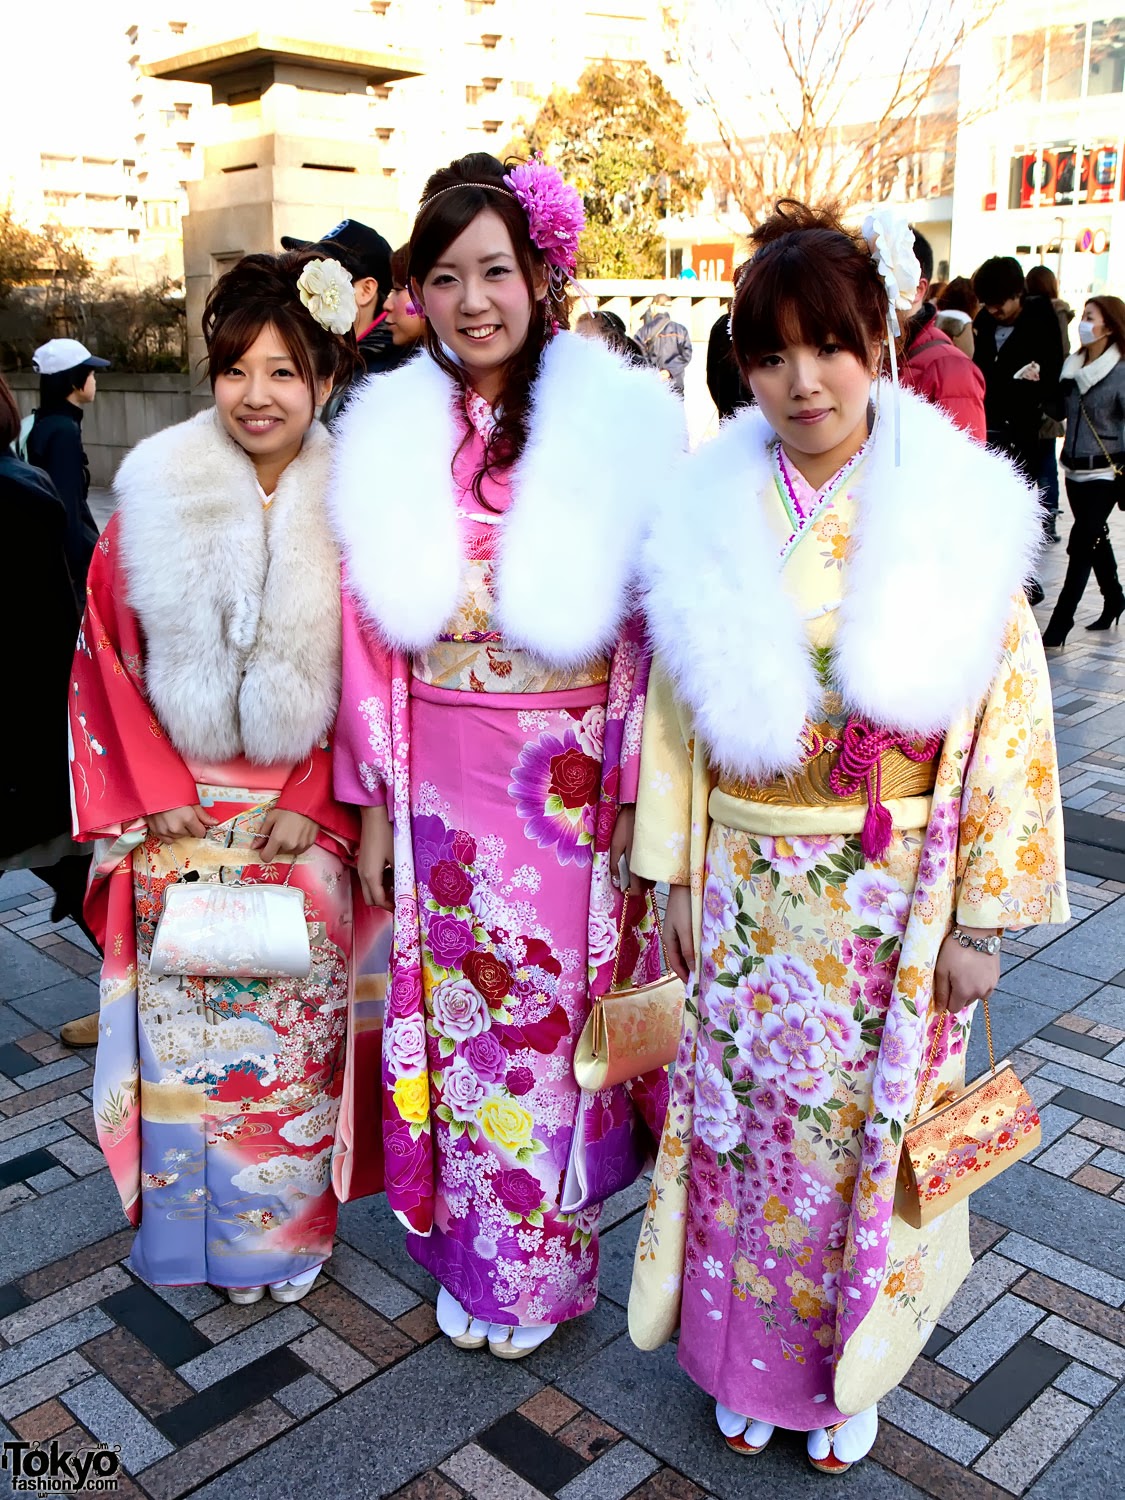 Random Thoughts: Memories of Japan: New Year's Day Customs